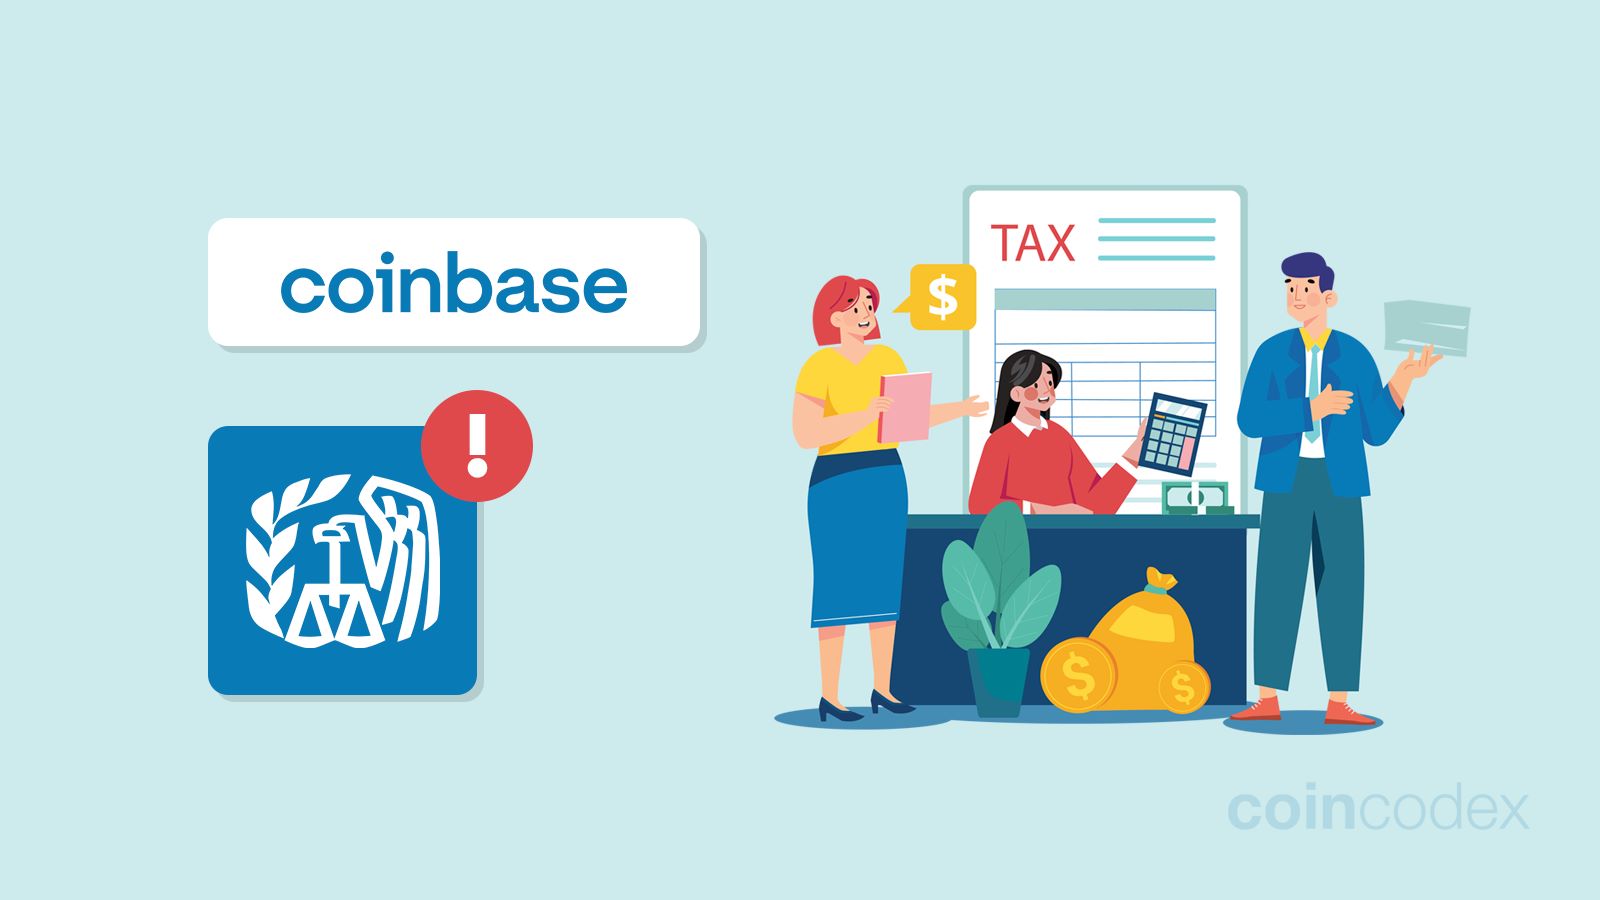 When Does Coinbase Report To The IRS?